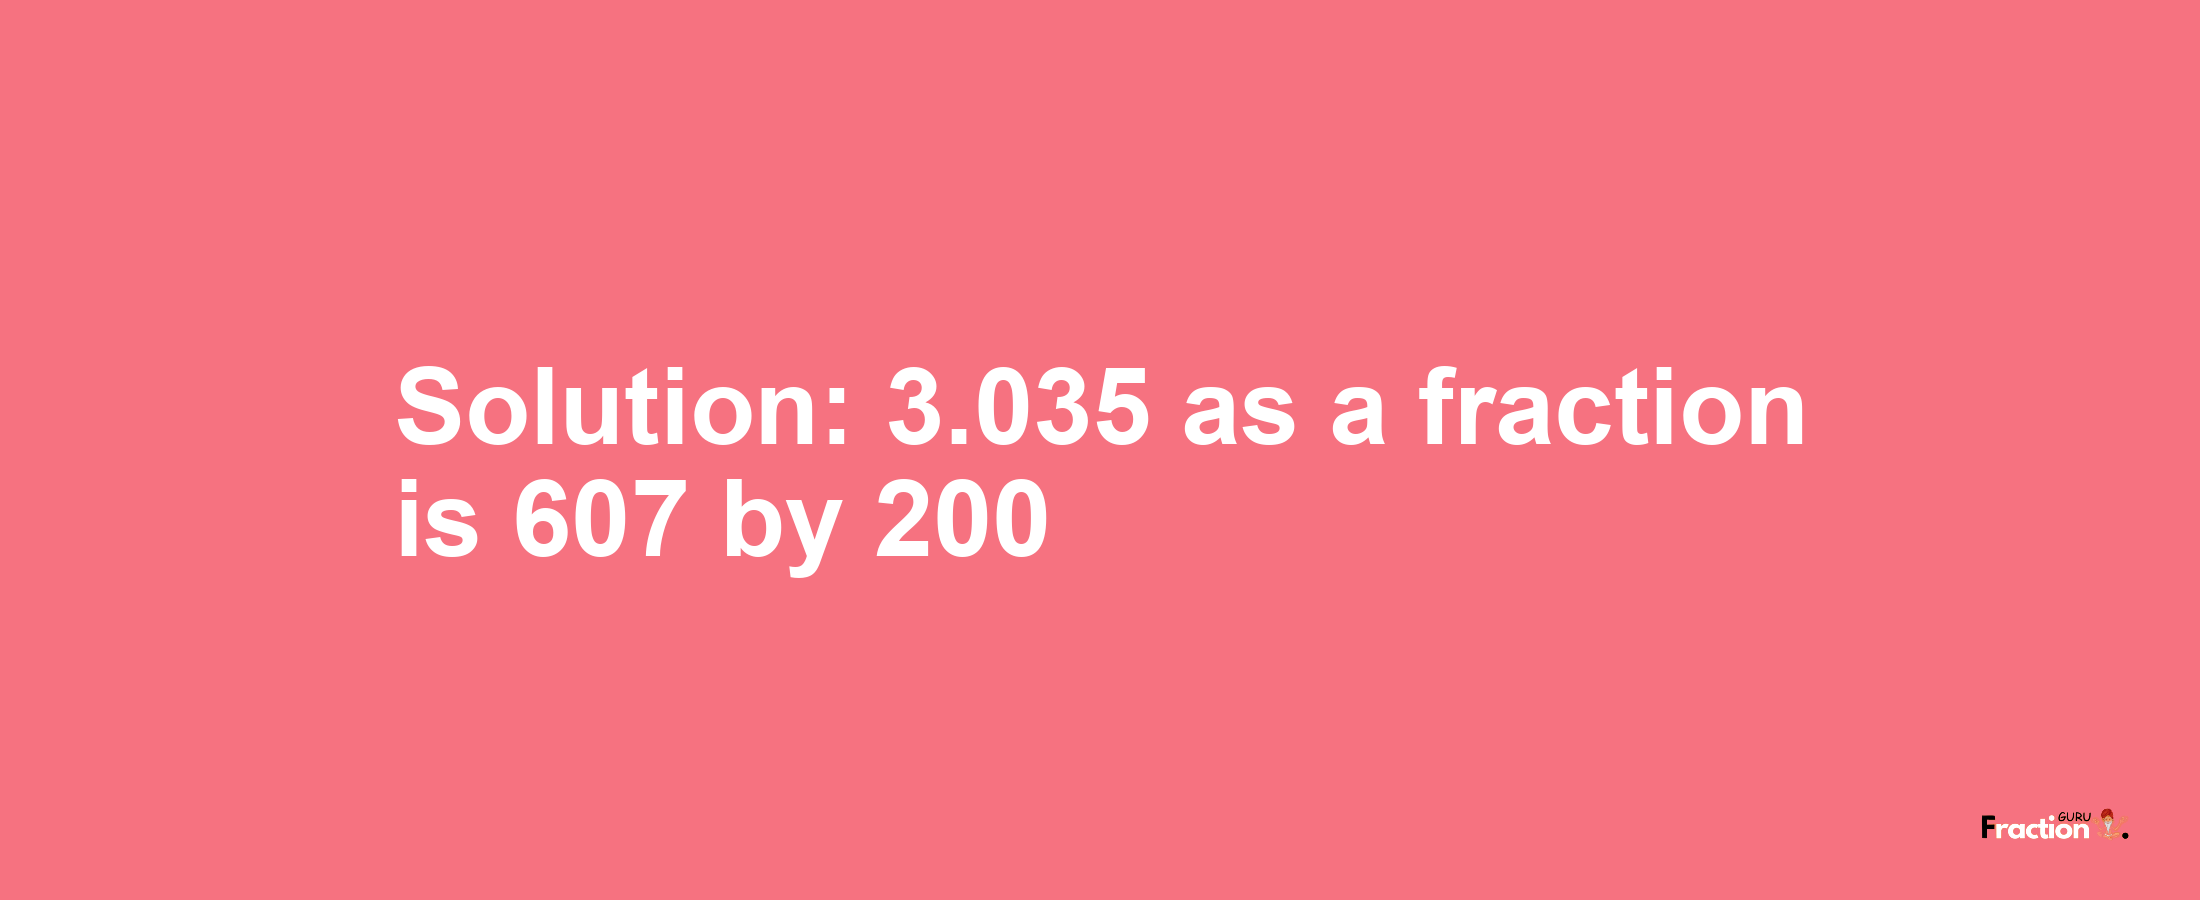 Solution:3.035 as a fraction is 607/200